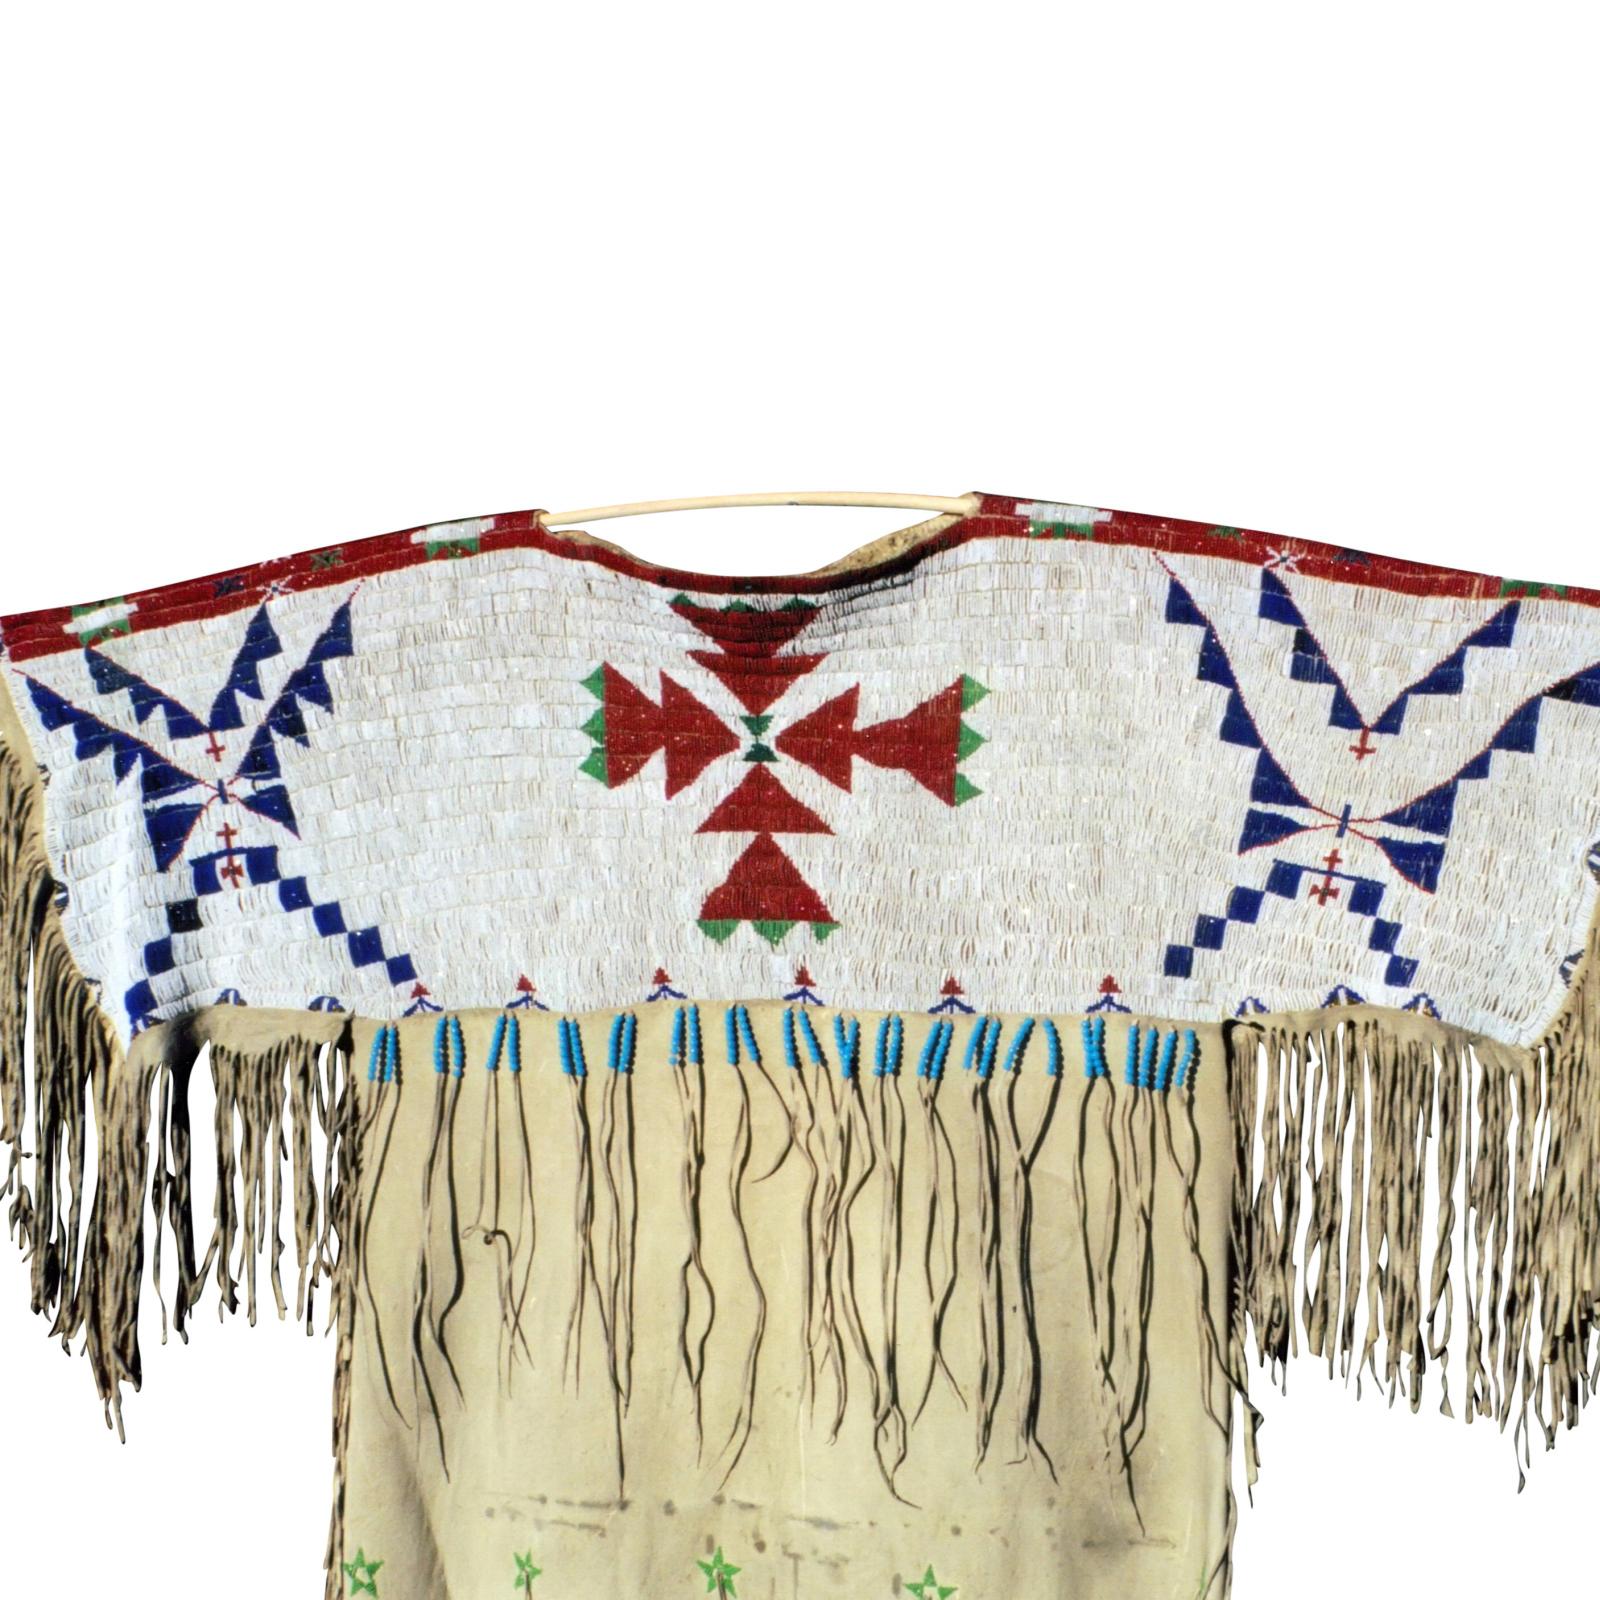 Faceted Beads; Arapaho/Sioux dress on brain-tanned buffalo. Simple four color design; was probably the first dress made after quilling. Stars on dress, and unusual beaded bottom.

Period: 1870s

Origin: Arapaho/Sioux Plains

Size: 42